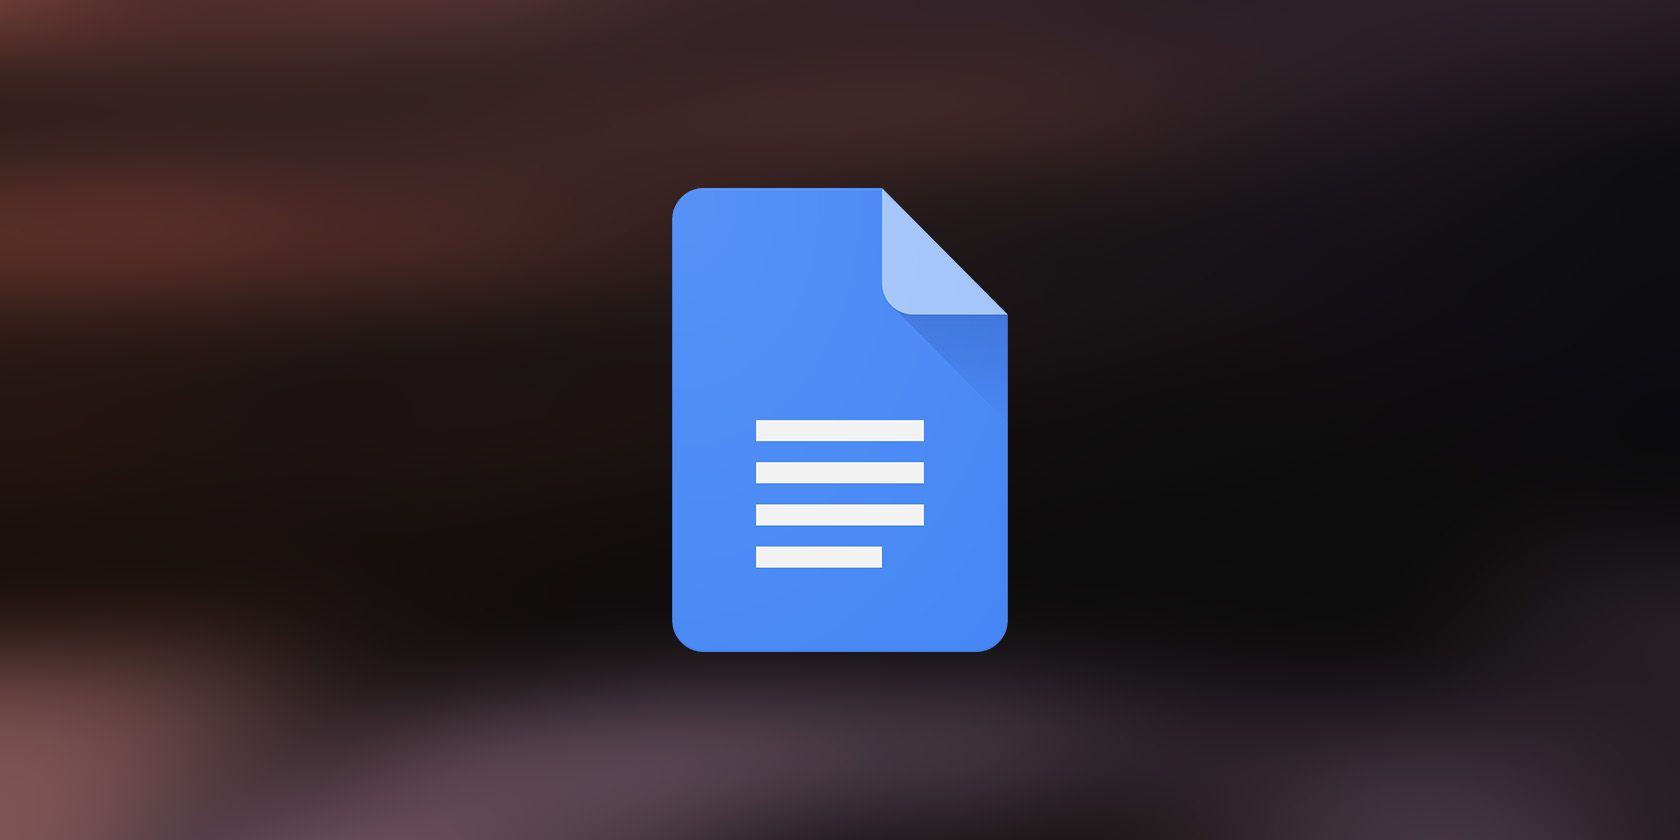 How to Create a Dropdown List in Google Docs